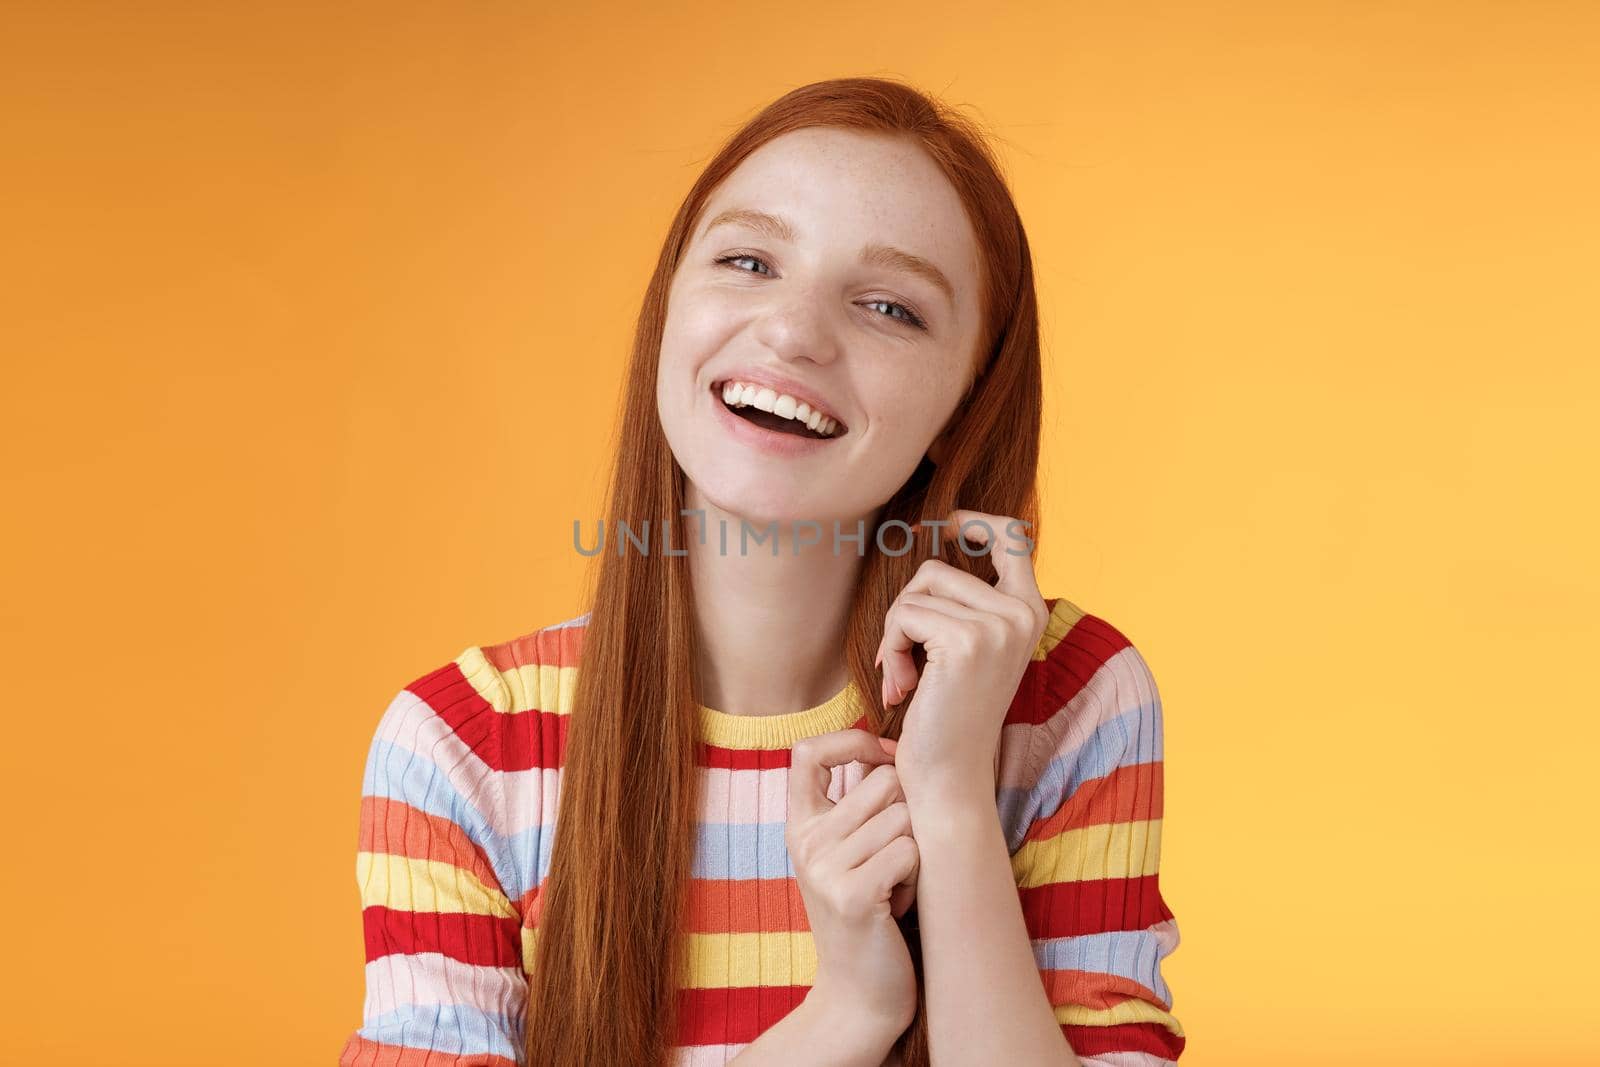 Silly good-looking flirty lively redhead young girl laughing playing coquettish ginger hair strand chuckling amused funny boyfriend jokes having fun awesome romantic date, orange background.